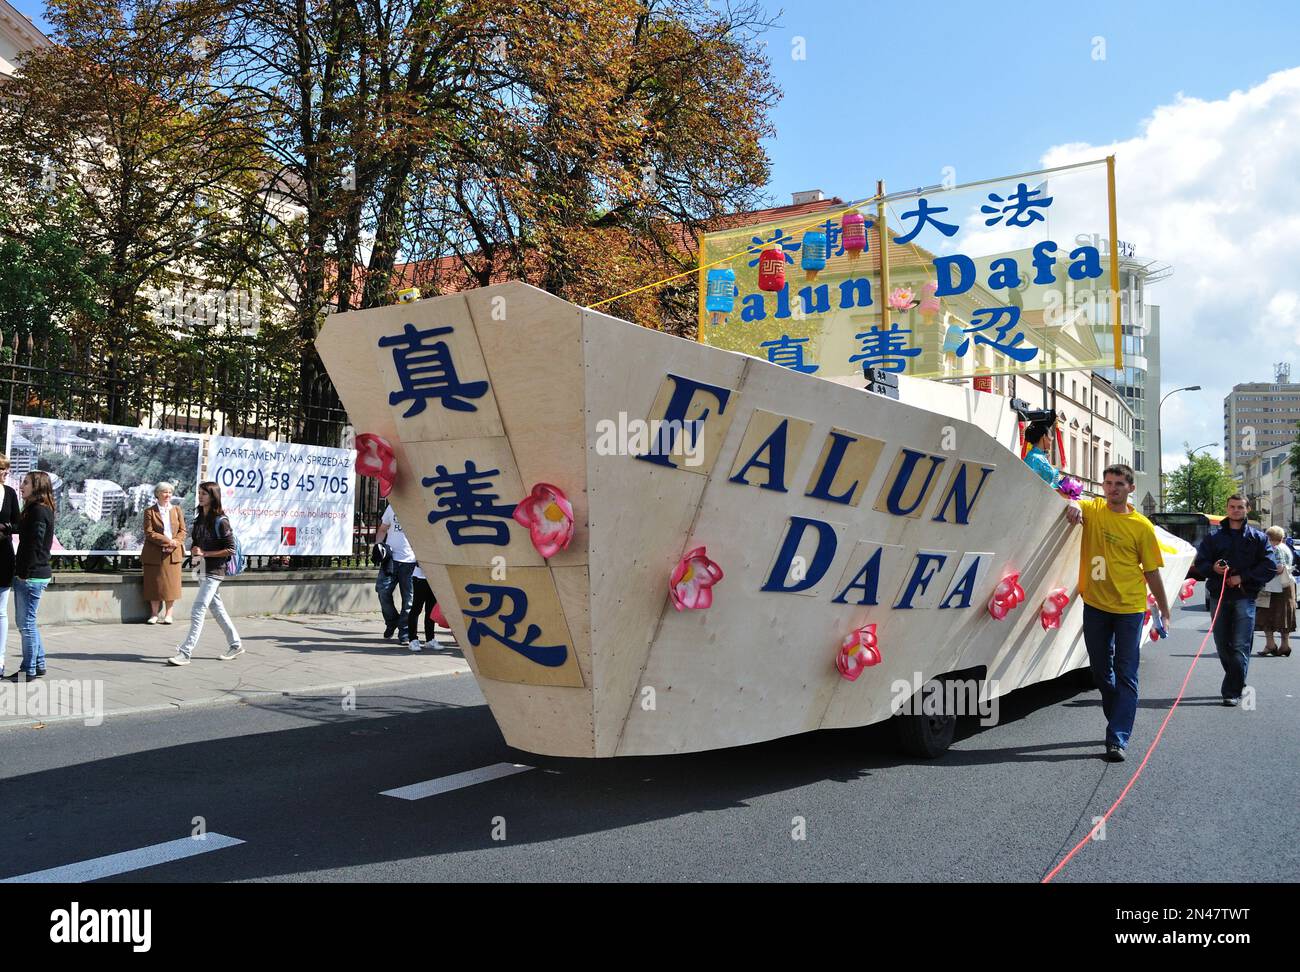 Dummy boat of the Falun Gong activists at the Multicultural Warsaw Street Party. Stock Photo